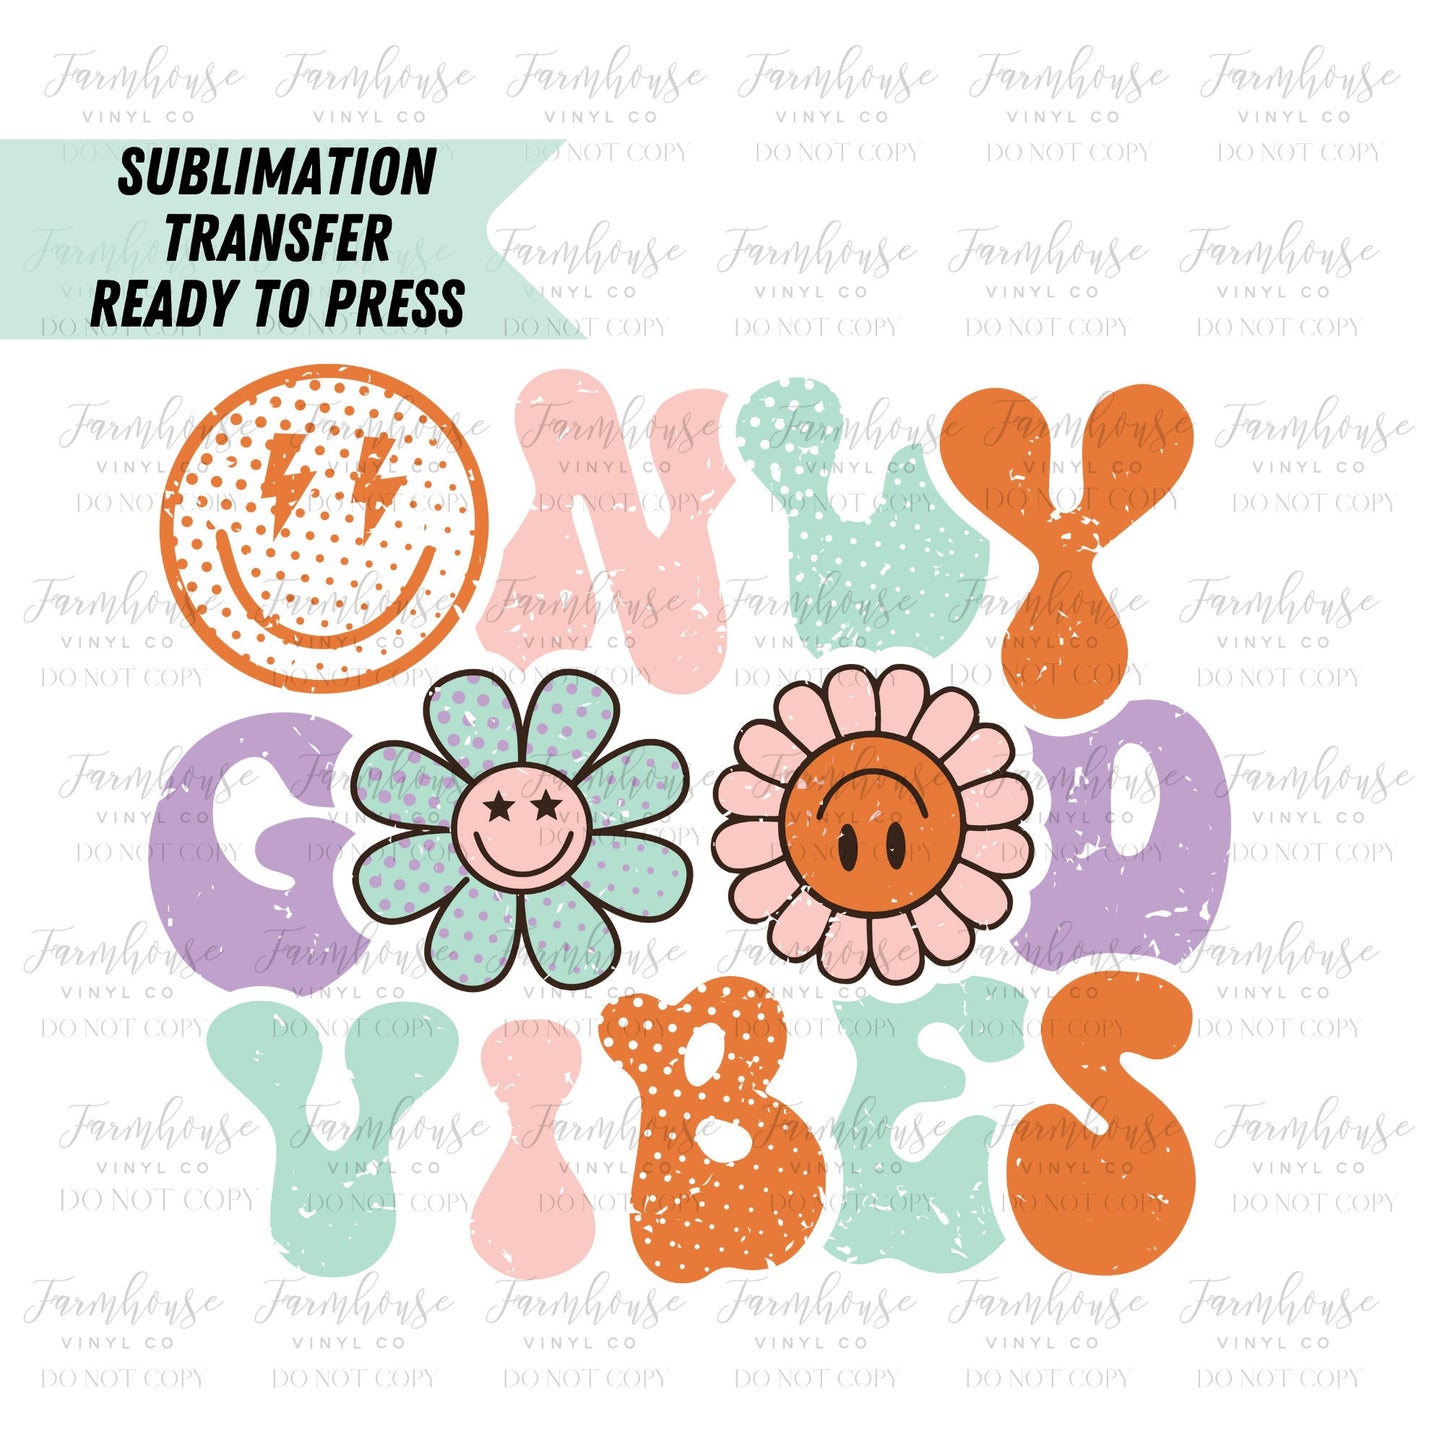 Only Good Vibes Pastel Smiley Face Ready to Press Sublimation Transfer - Farmhouse Vinyl Co